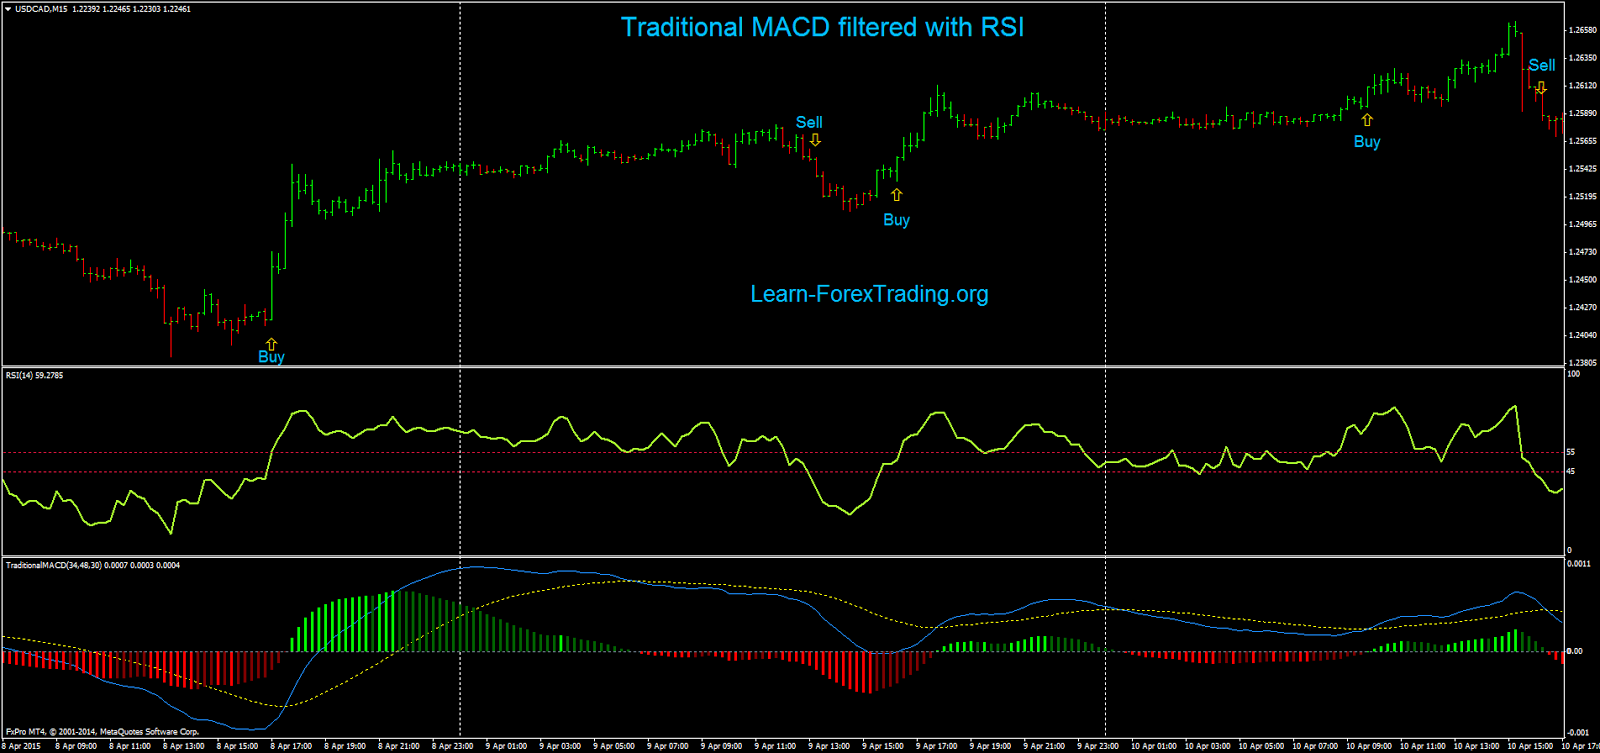 Traditional MACD filtered with RSI